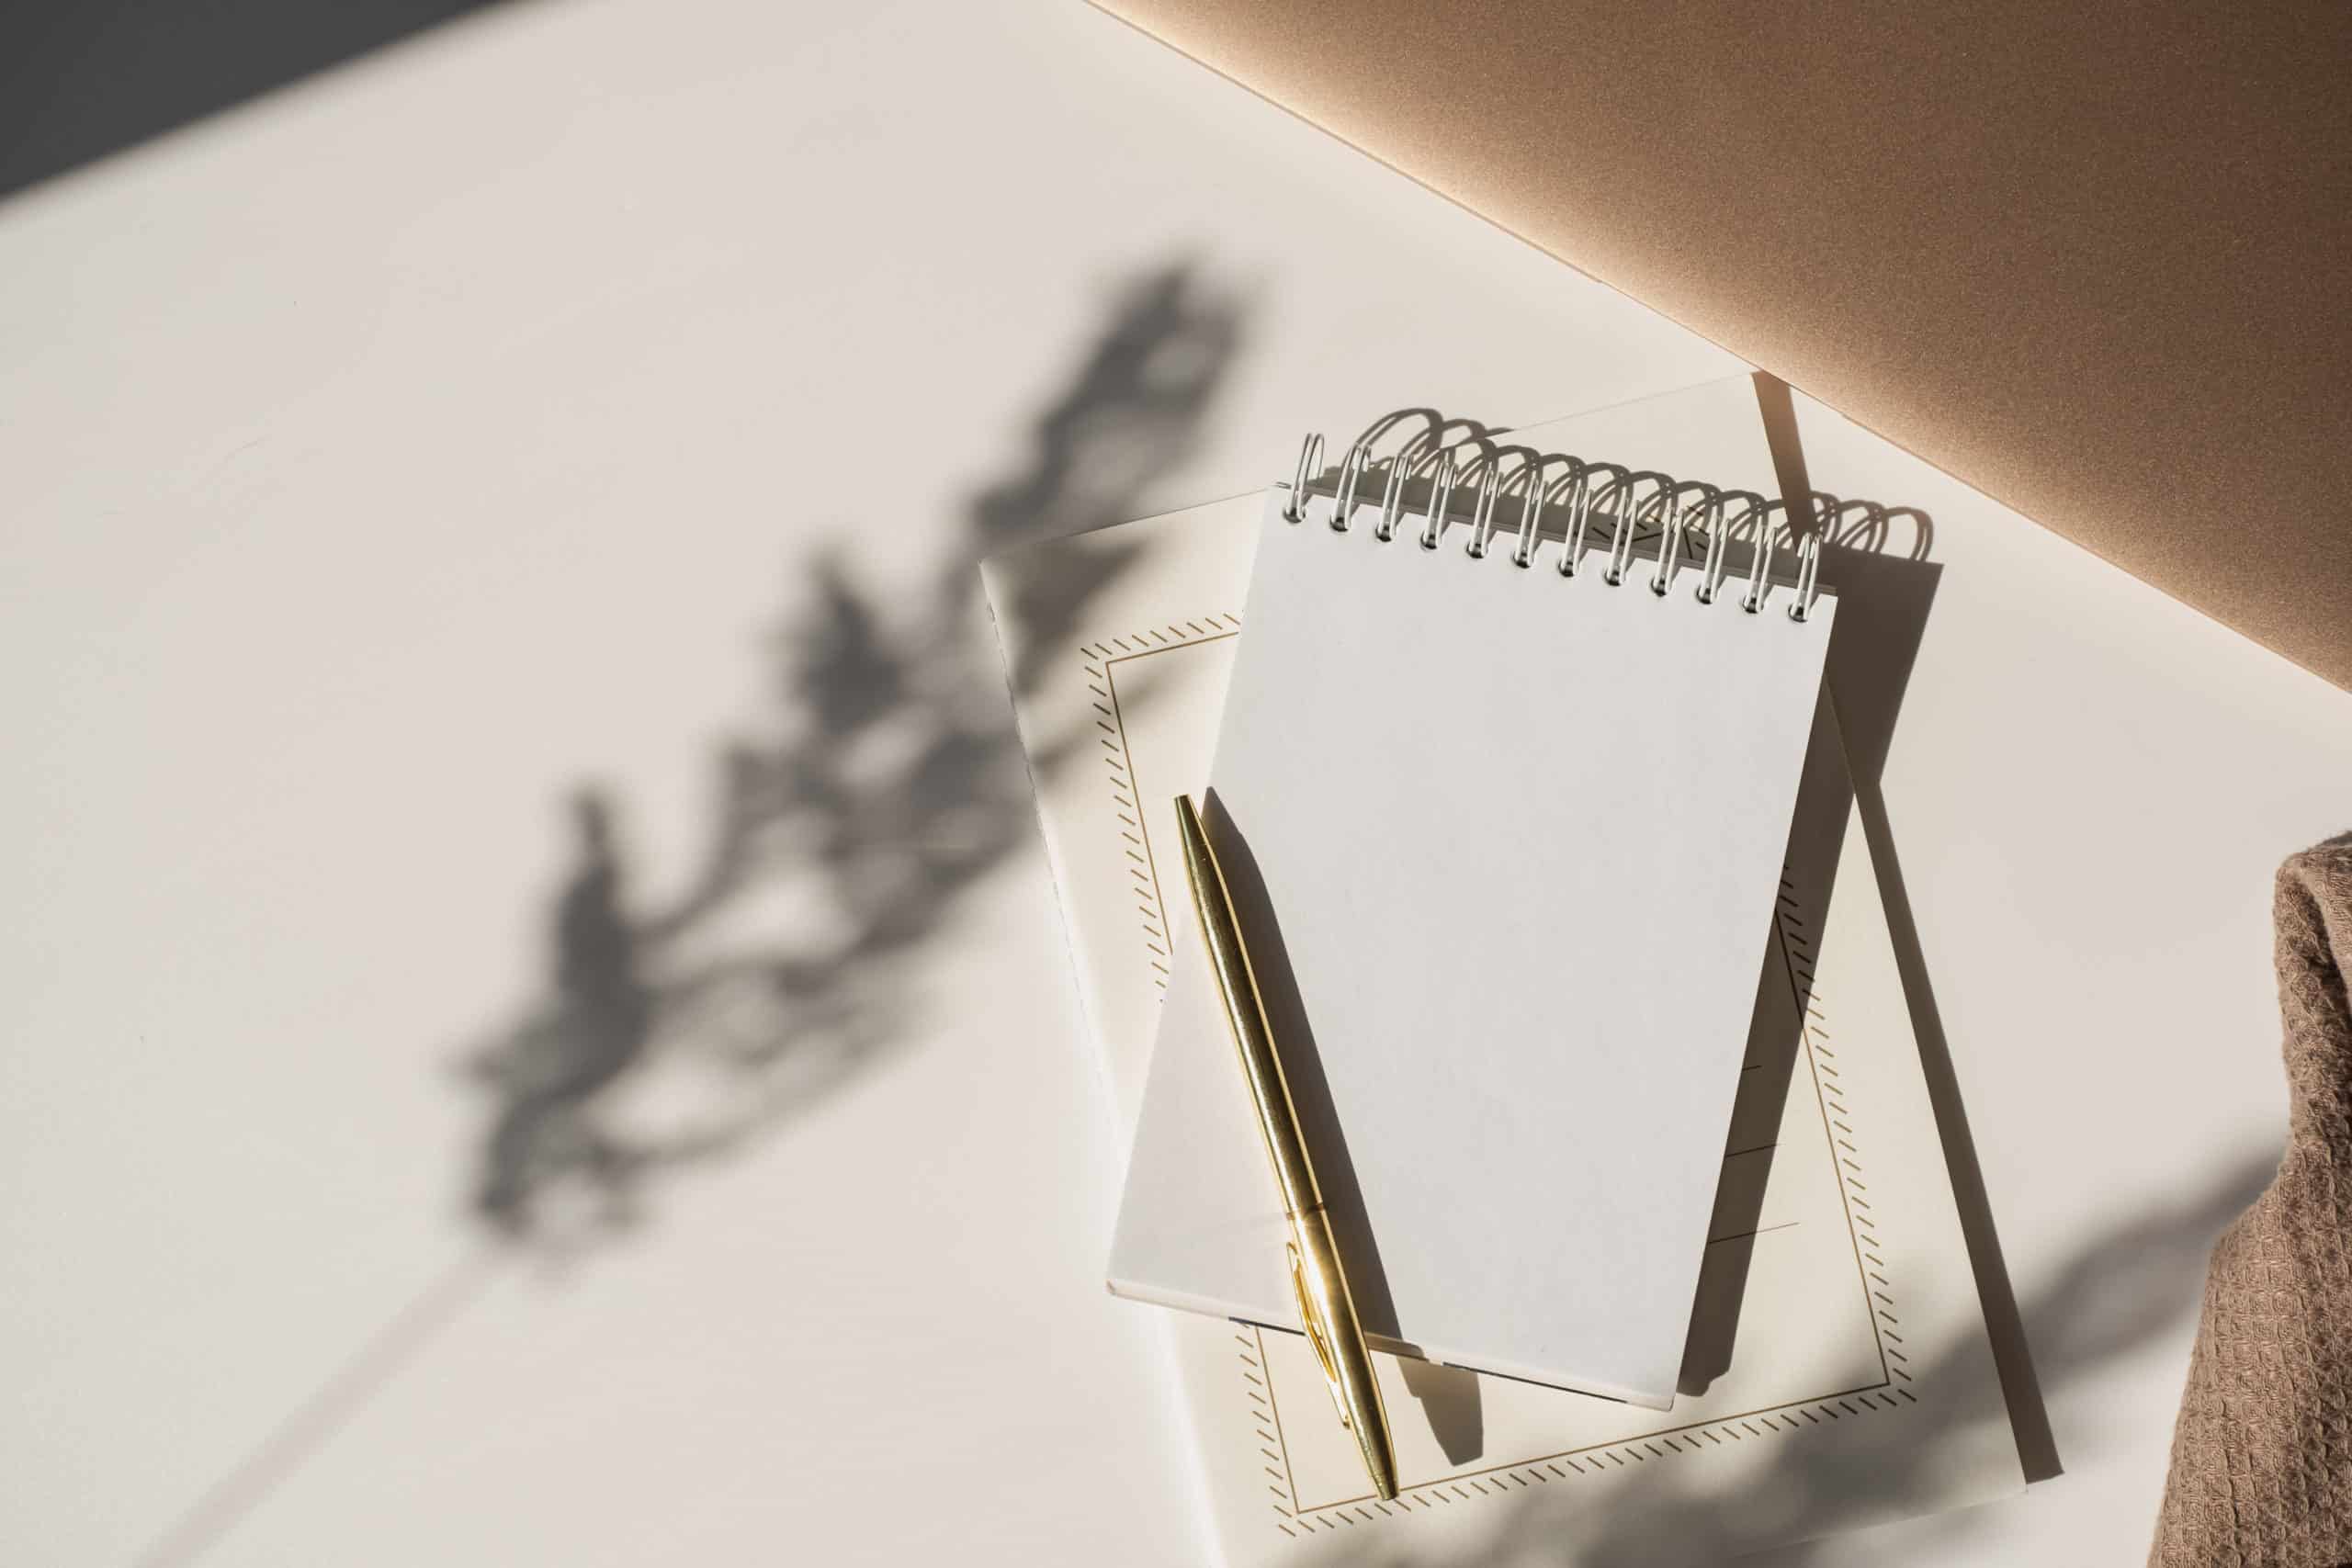 Blank spiral notebook, stationery paper, and pen in flowers sunlight shadow